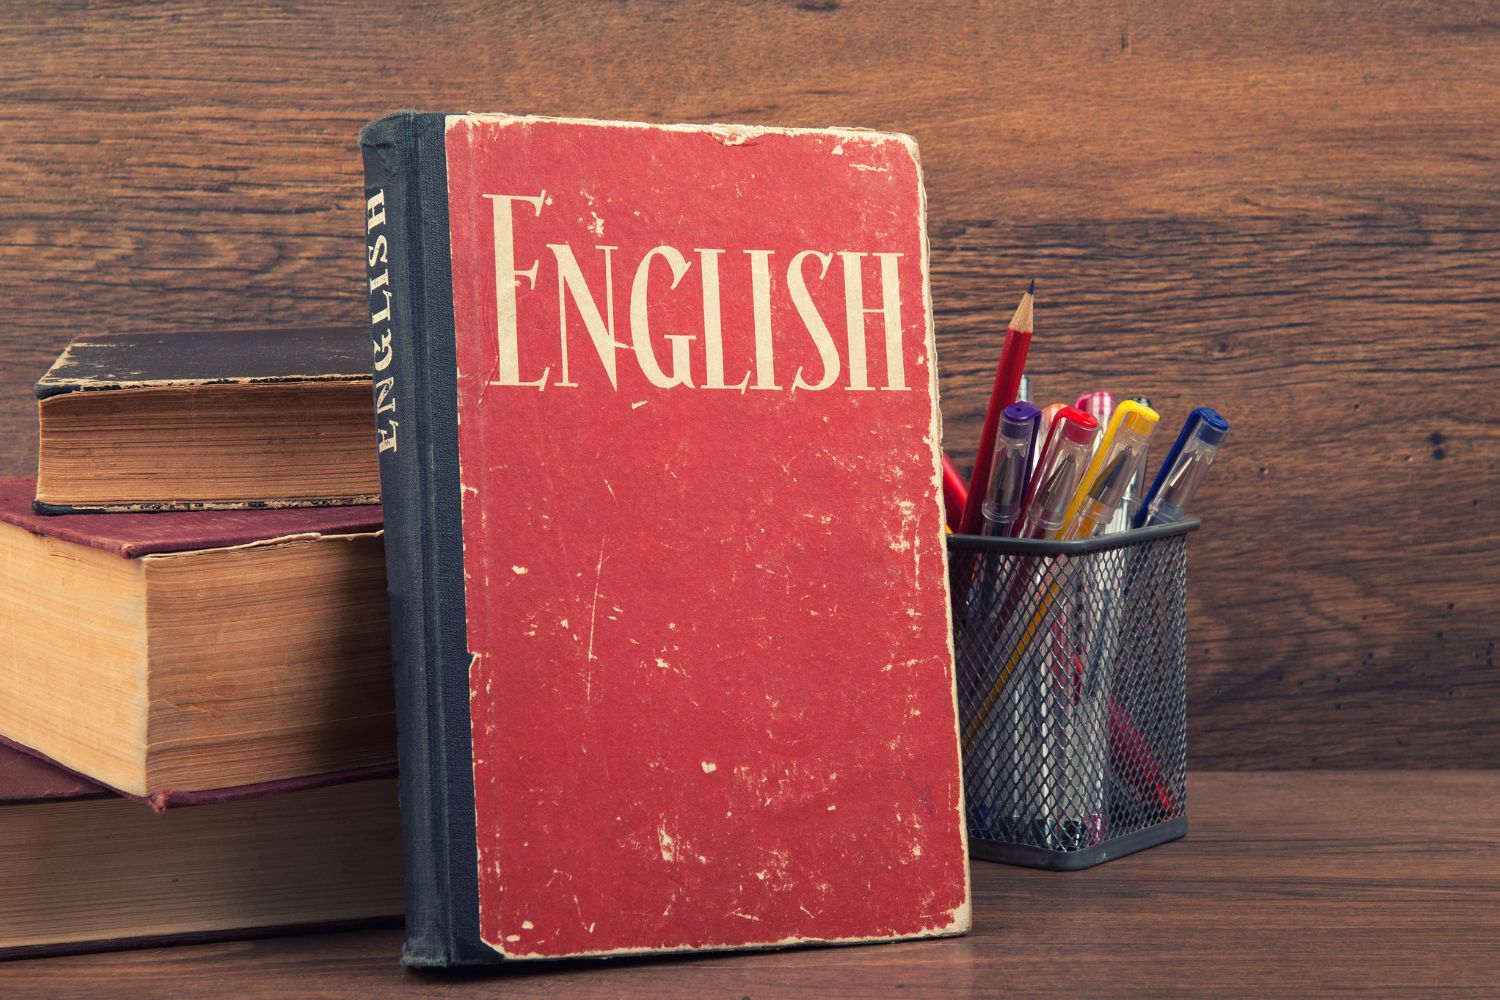 Each of the details of learning for the English language